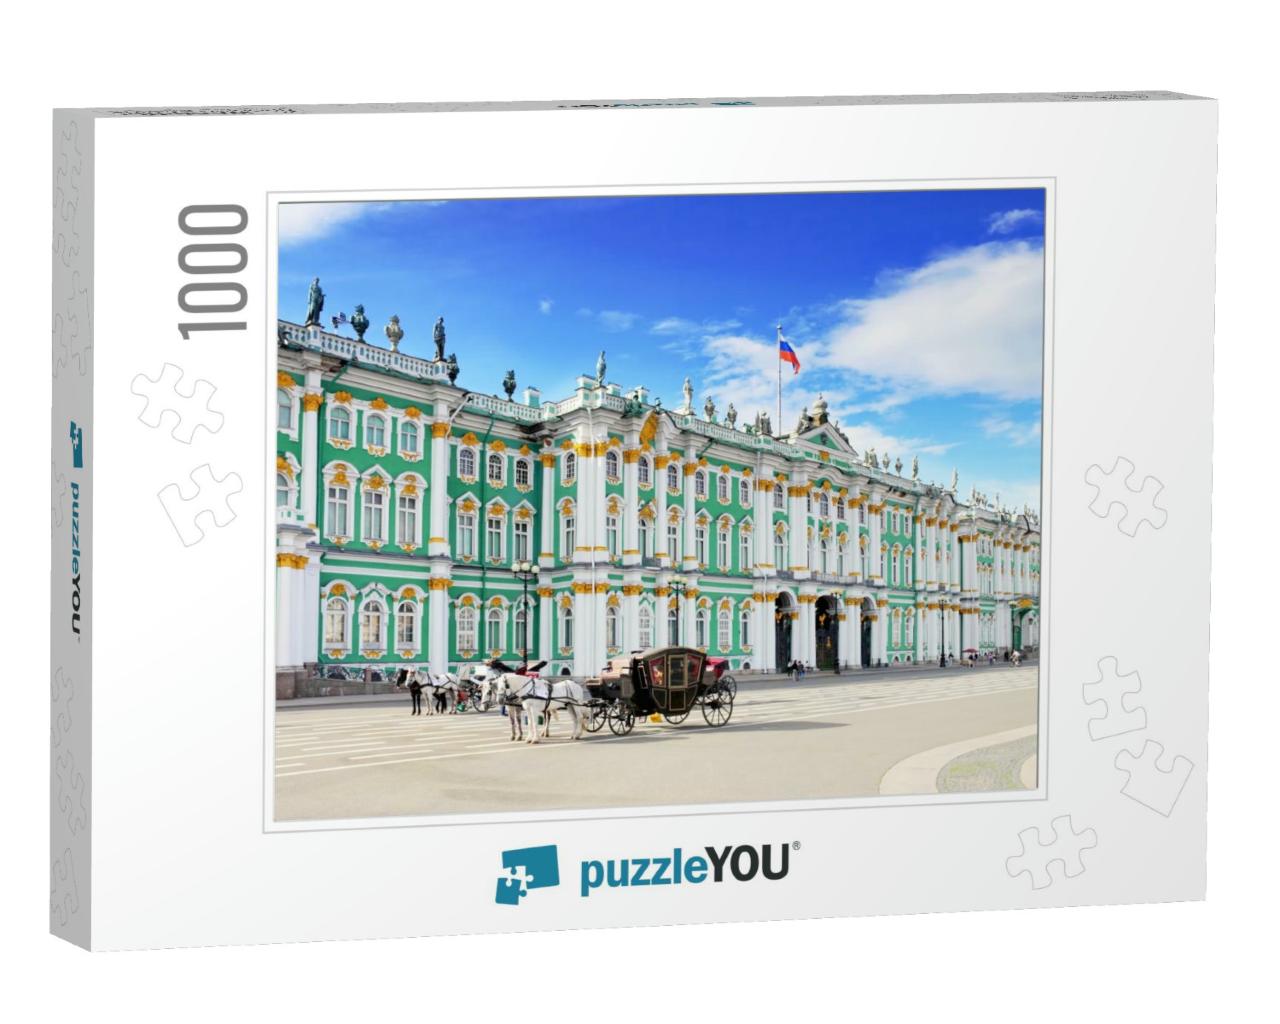 View Winter Palace Square in Saint Petersburg... Jigsaw Puzzle with 1000 pieces